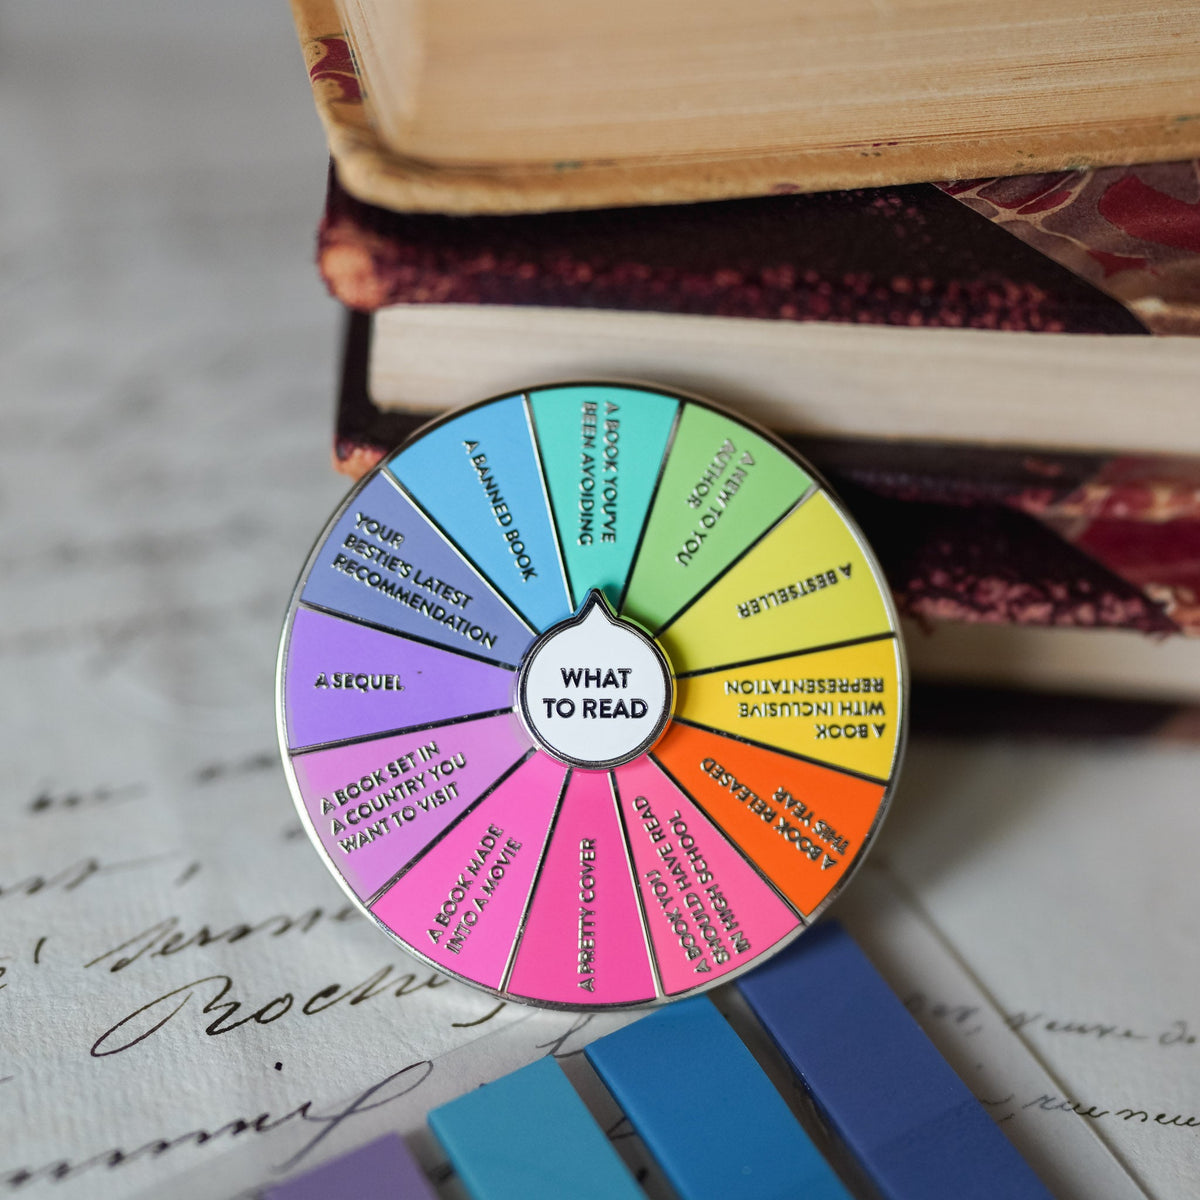 What To Read Spinner Enamel Pin with colored labels listing various book choices.